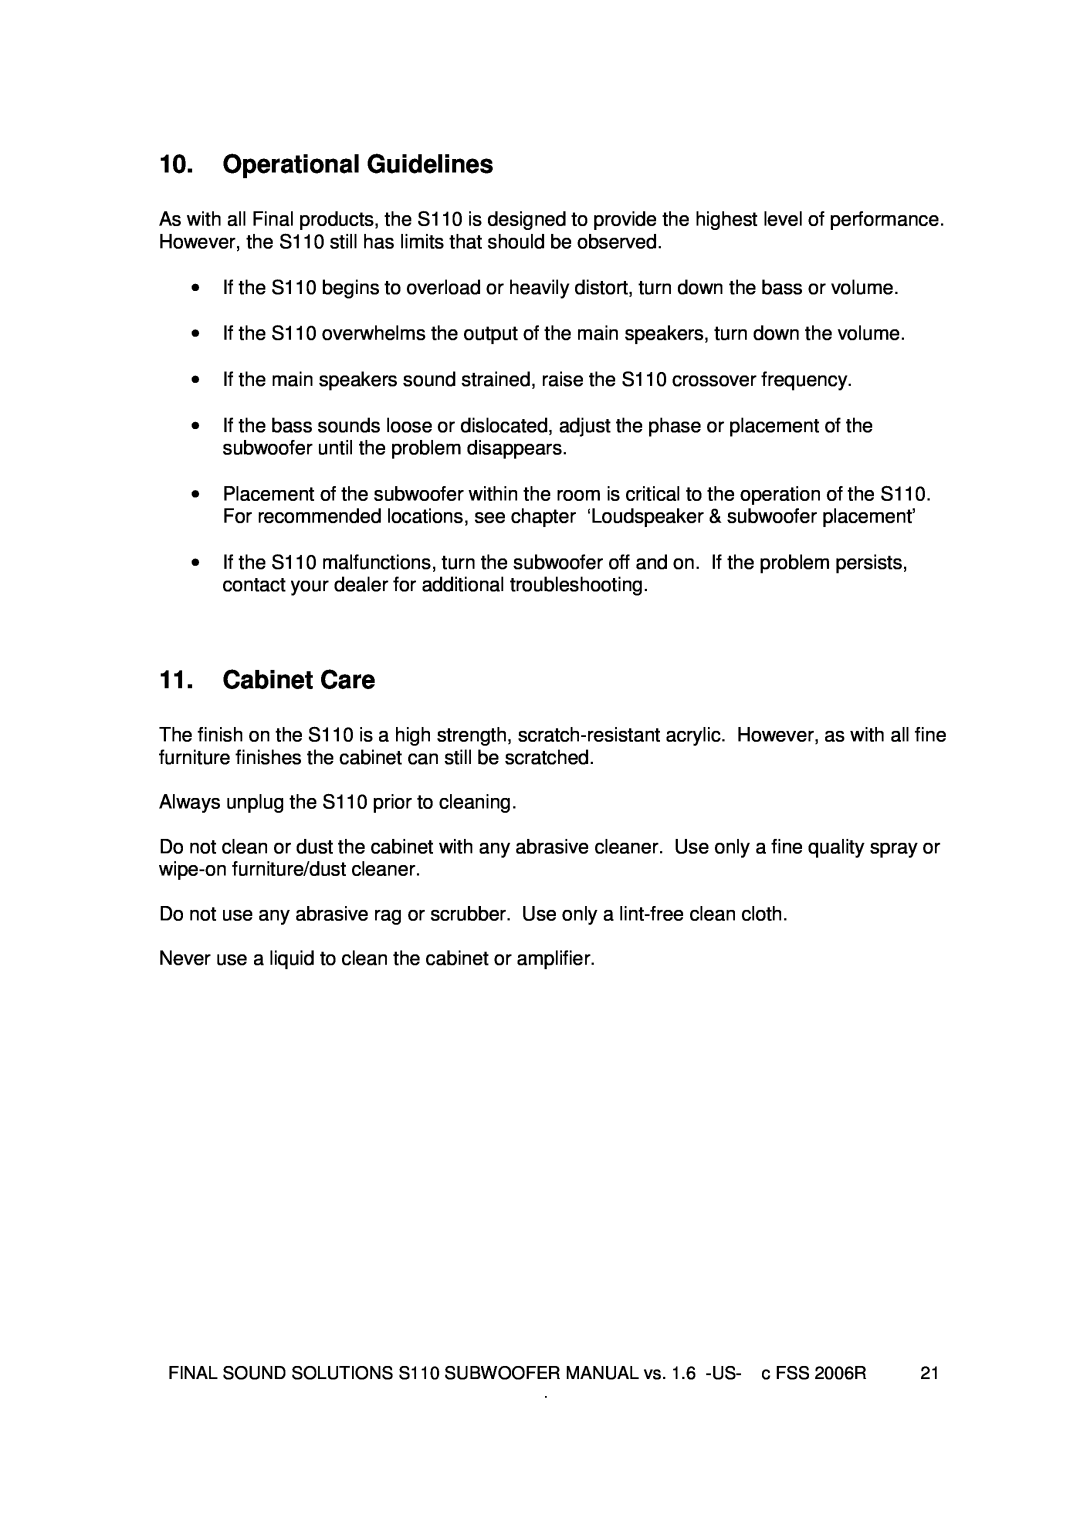 Final Sound S110 user manual Operational Guidelines, Cabinet Care 